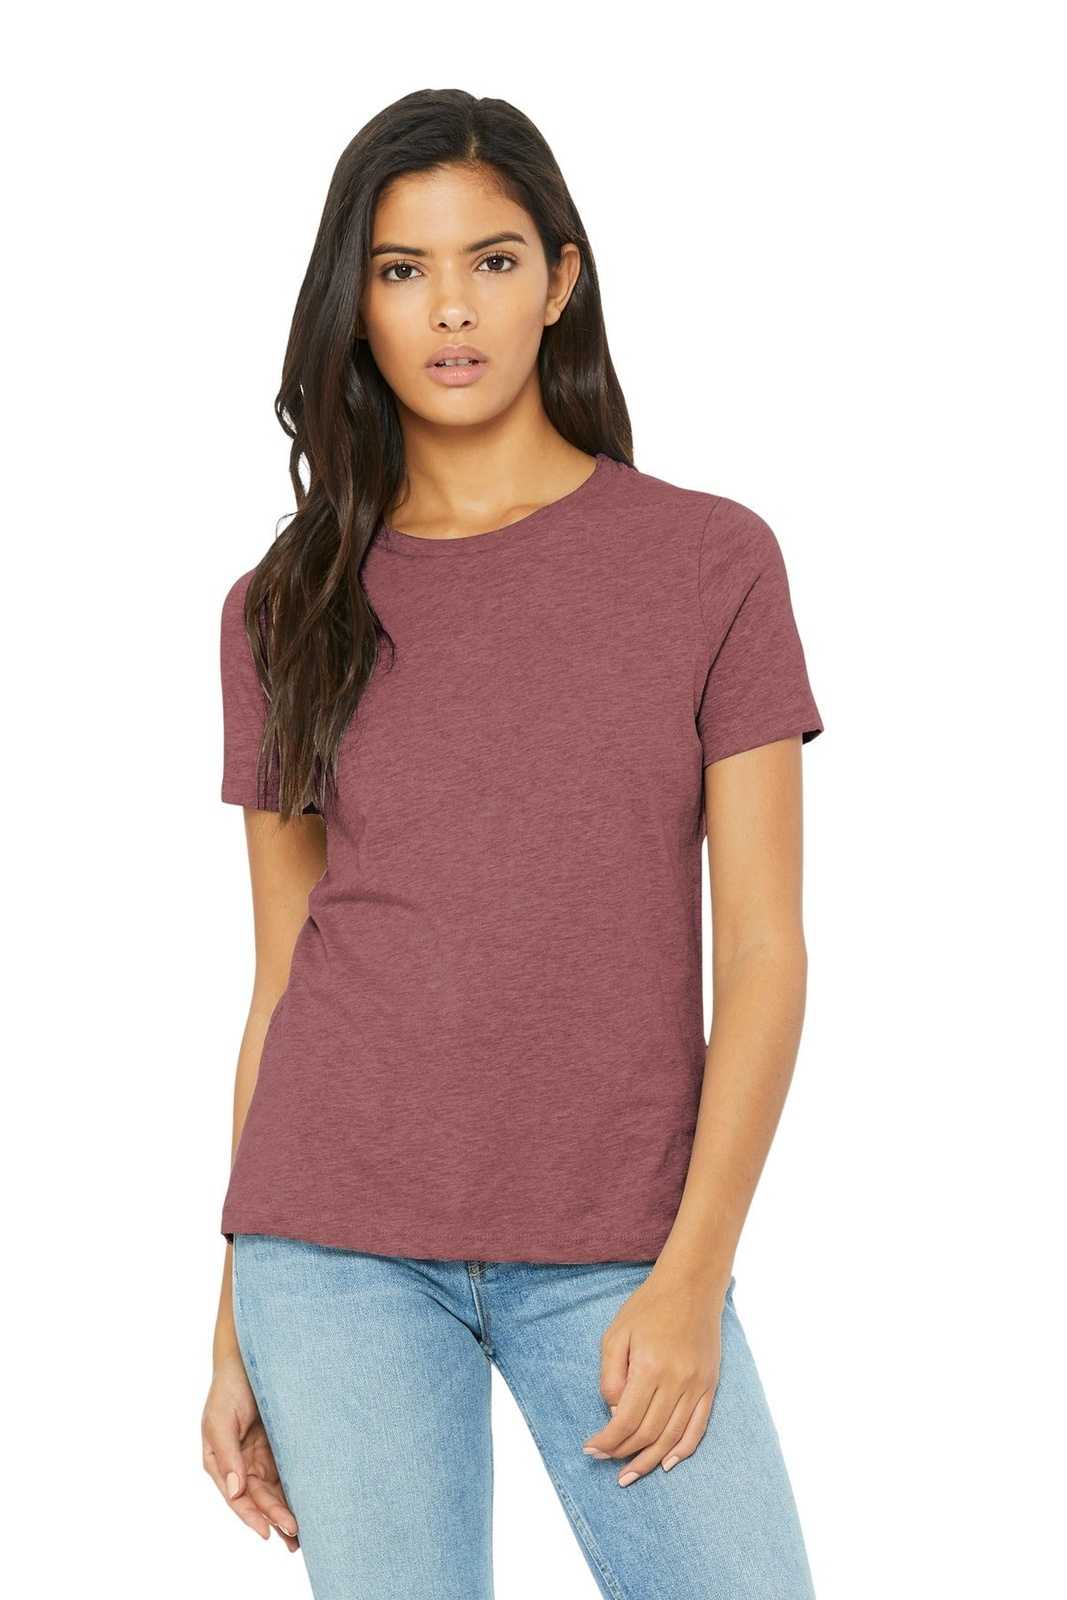 Bella + Canvas 6400 Women's Relaxed Jersey Short Sleeve Tee - Heather Mauve - HIT a Double